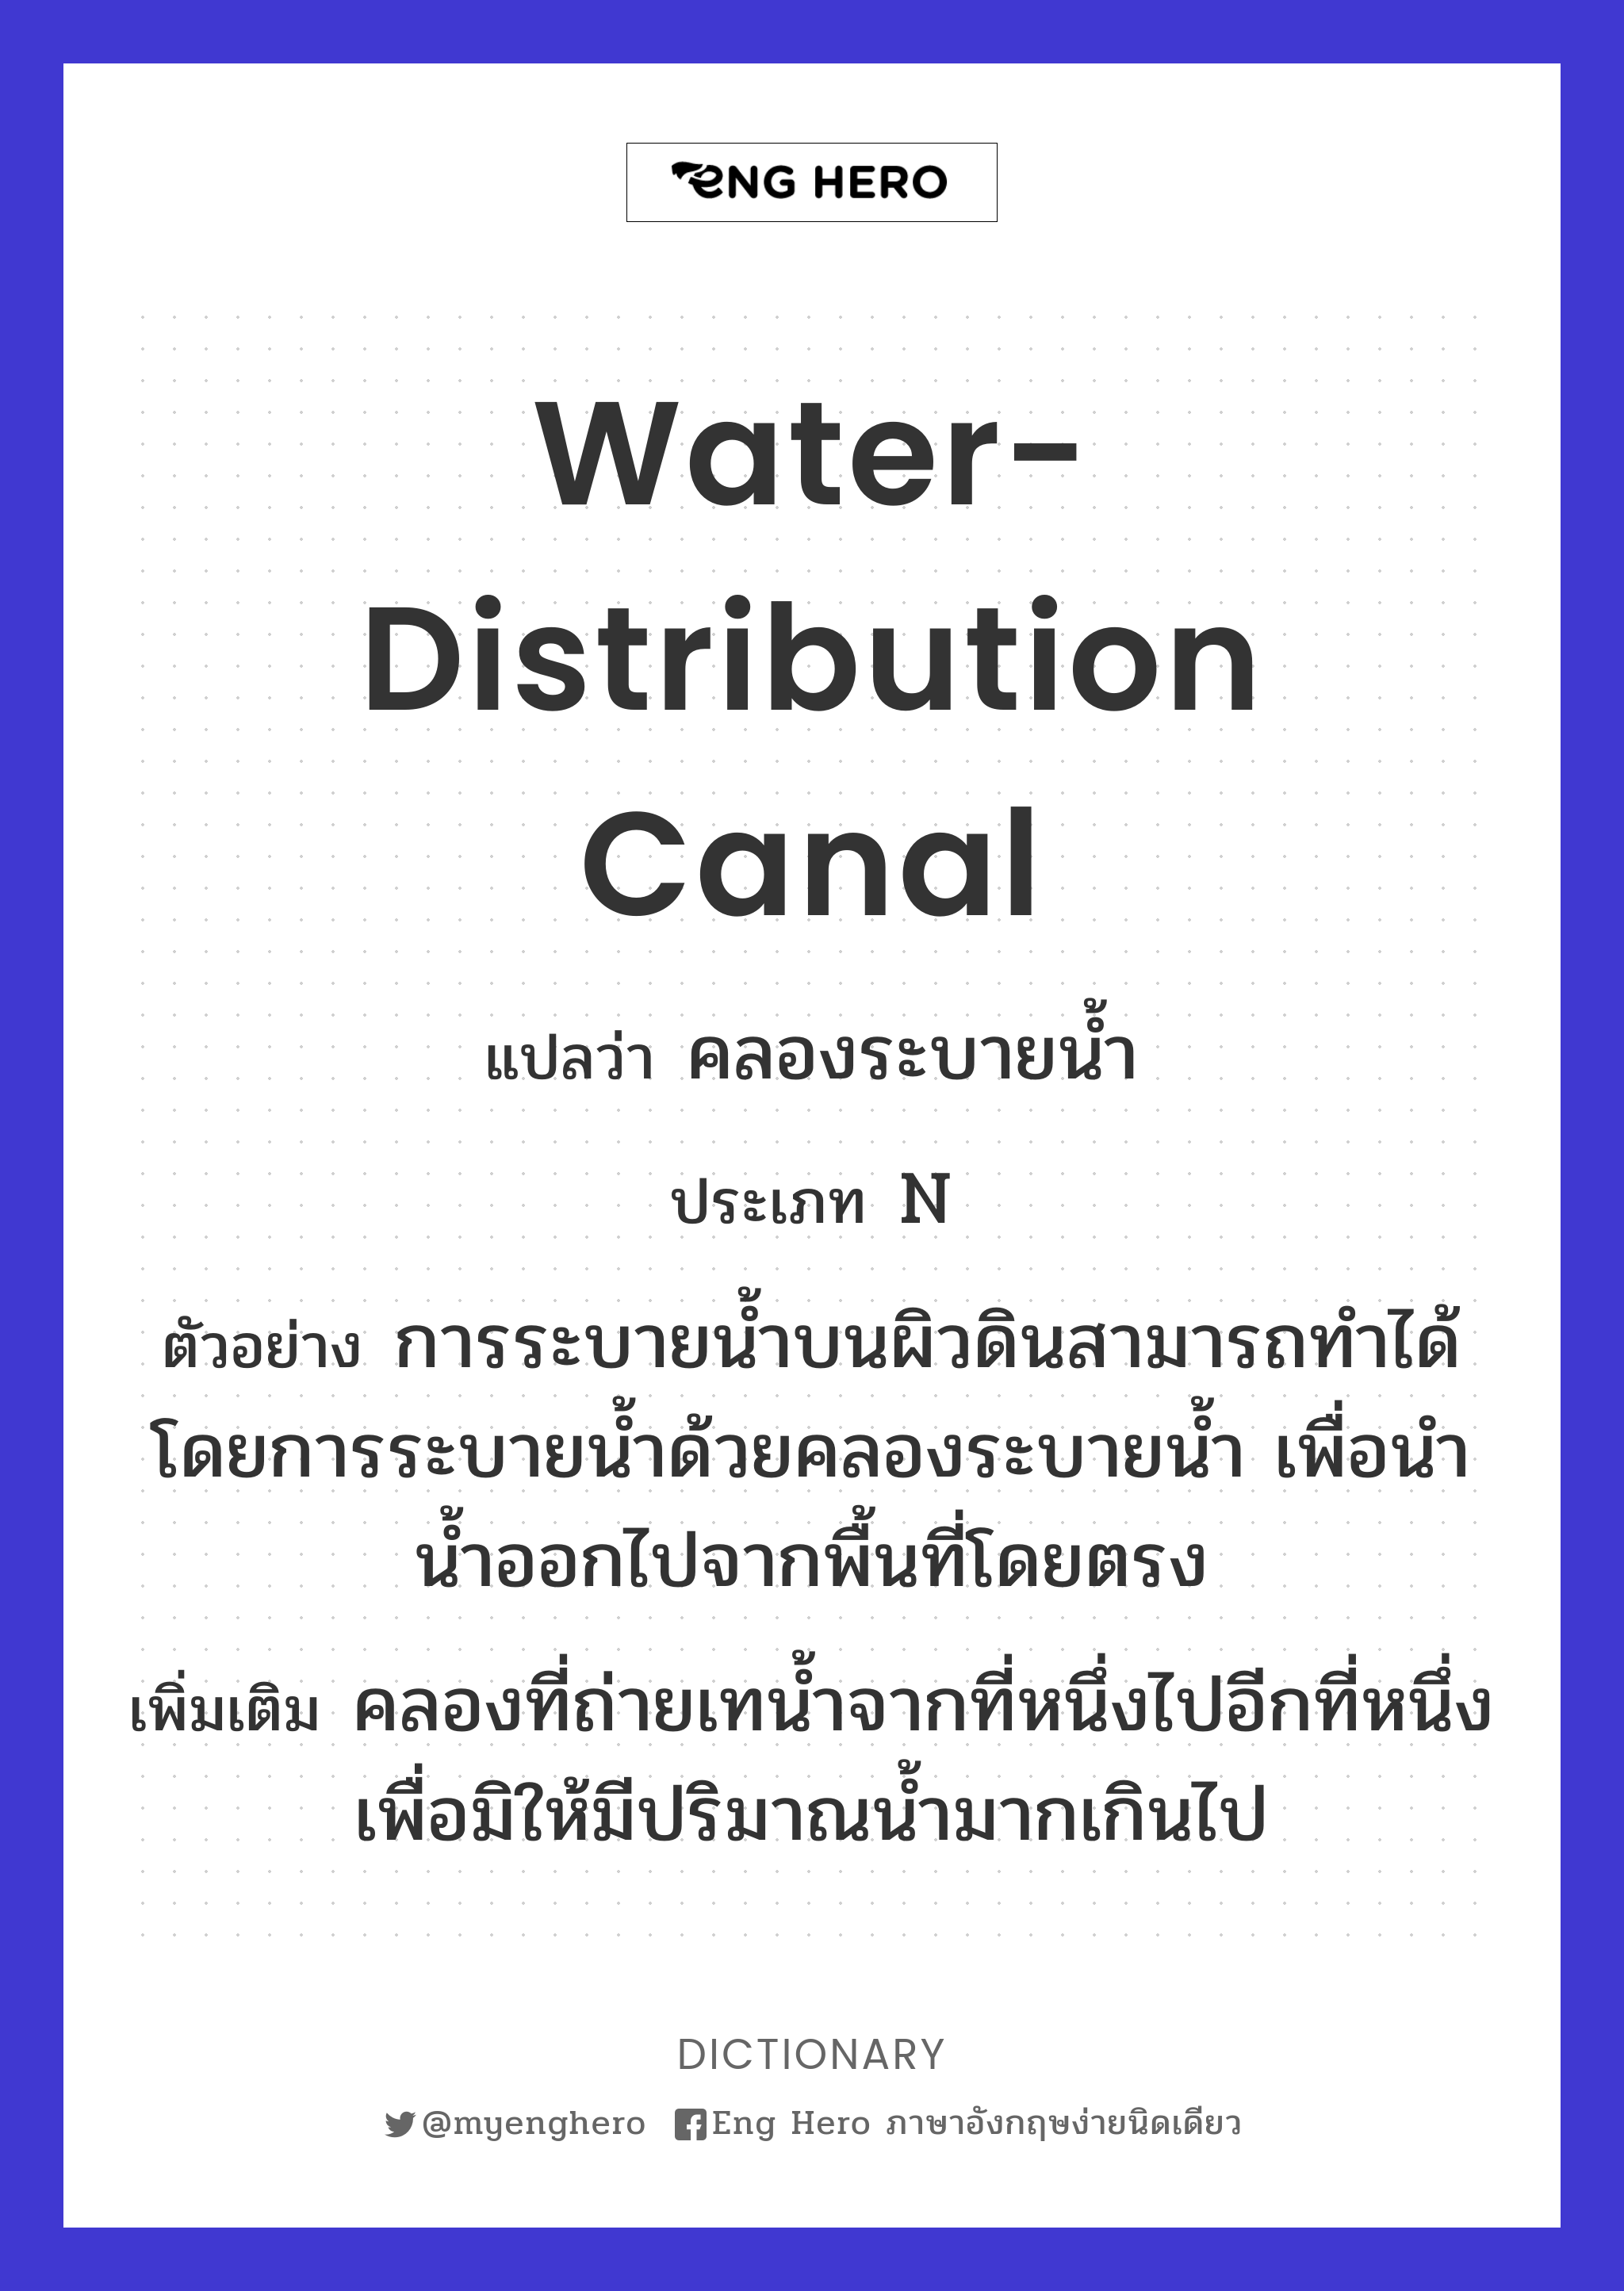 water-distribution canal